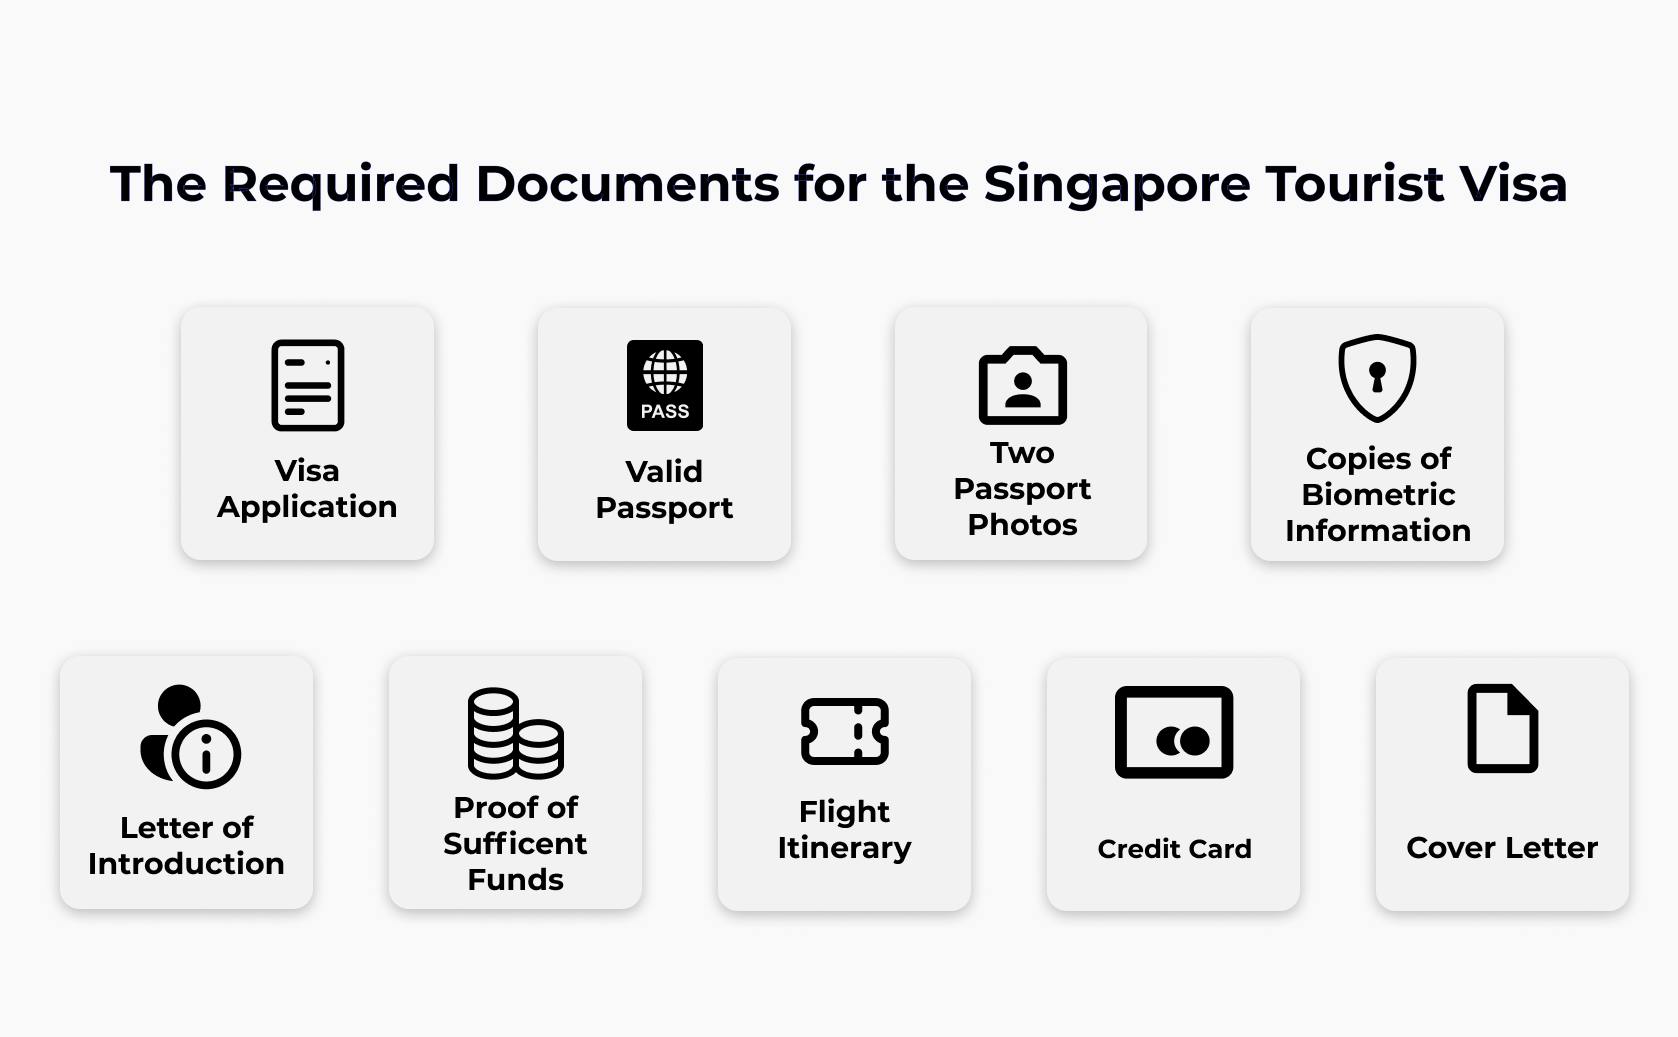 Required documents for the Singapore tourist visa